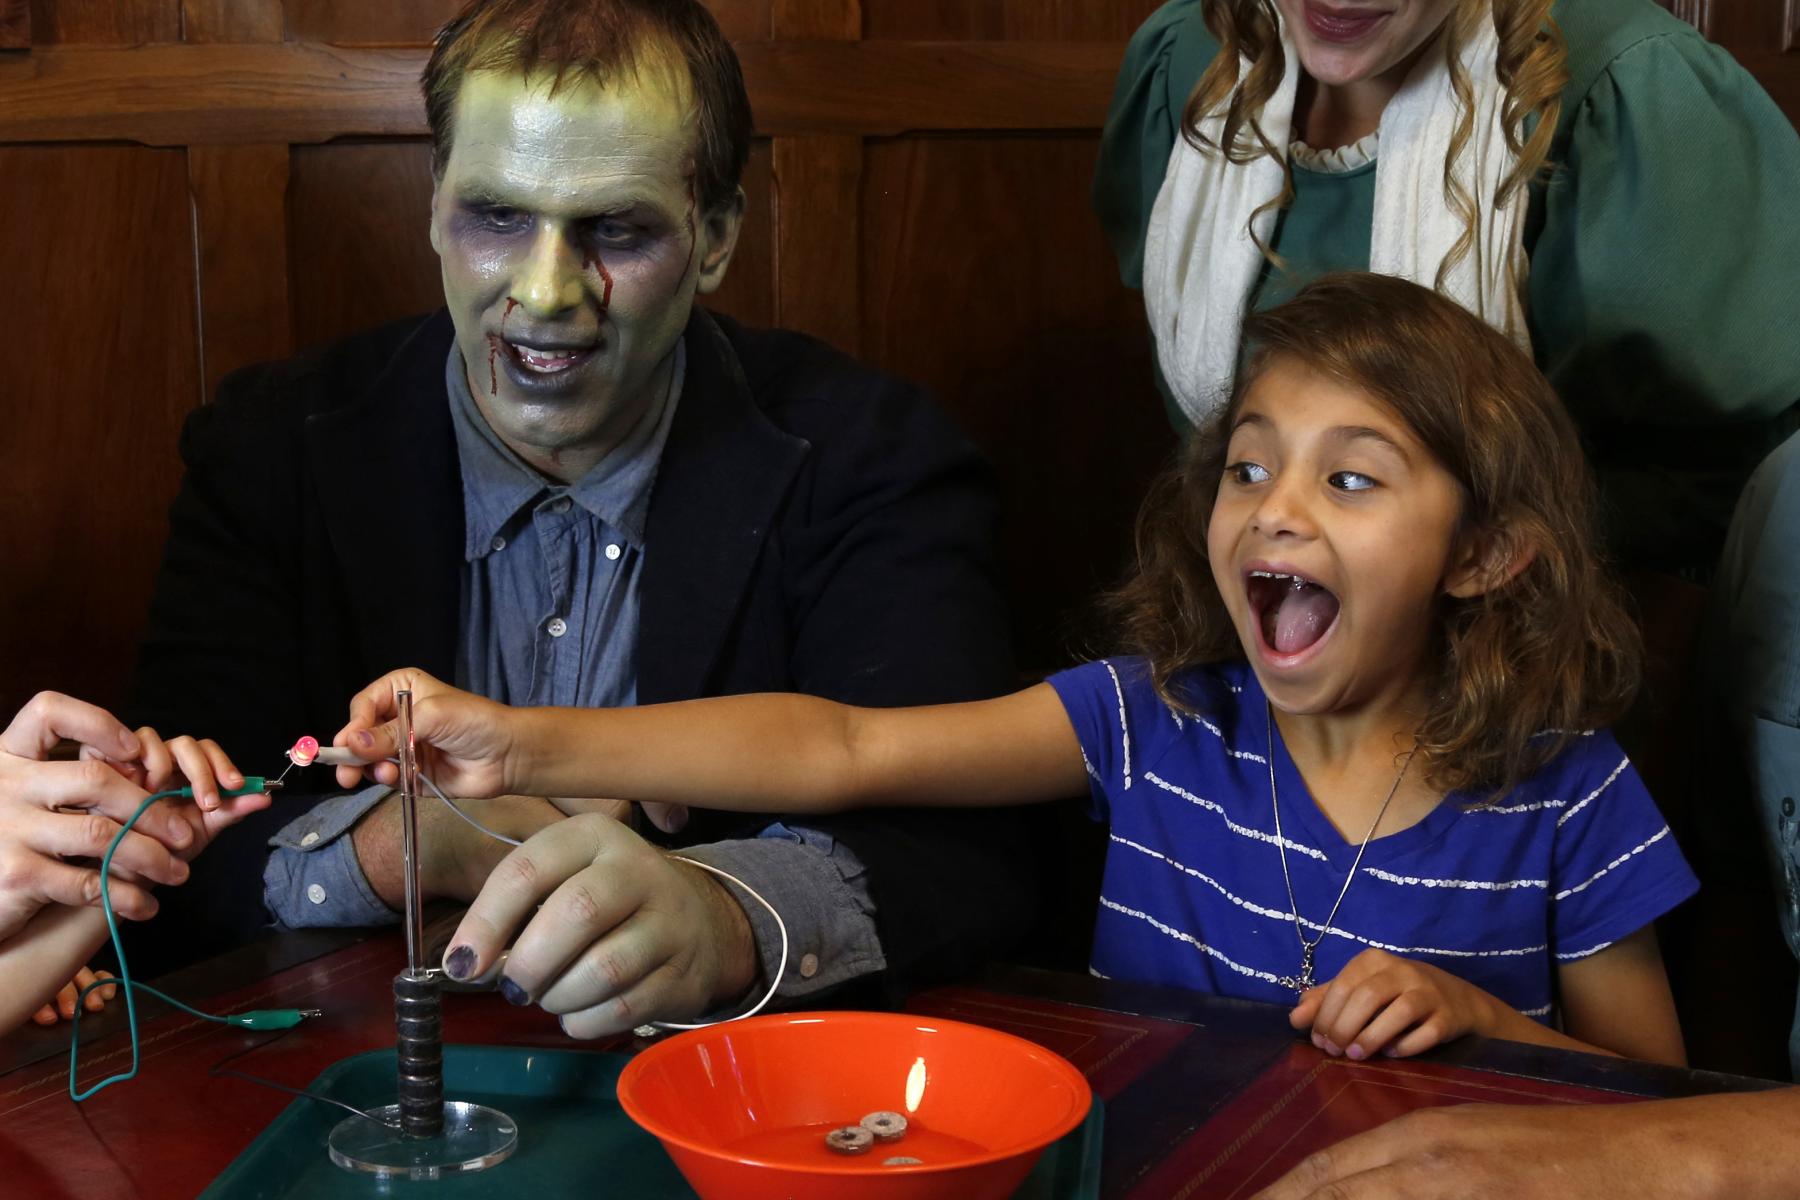 Child with excited facial expression using battery stack activity with adults dressed as Mary Shelley and Frankenstein's monster